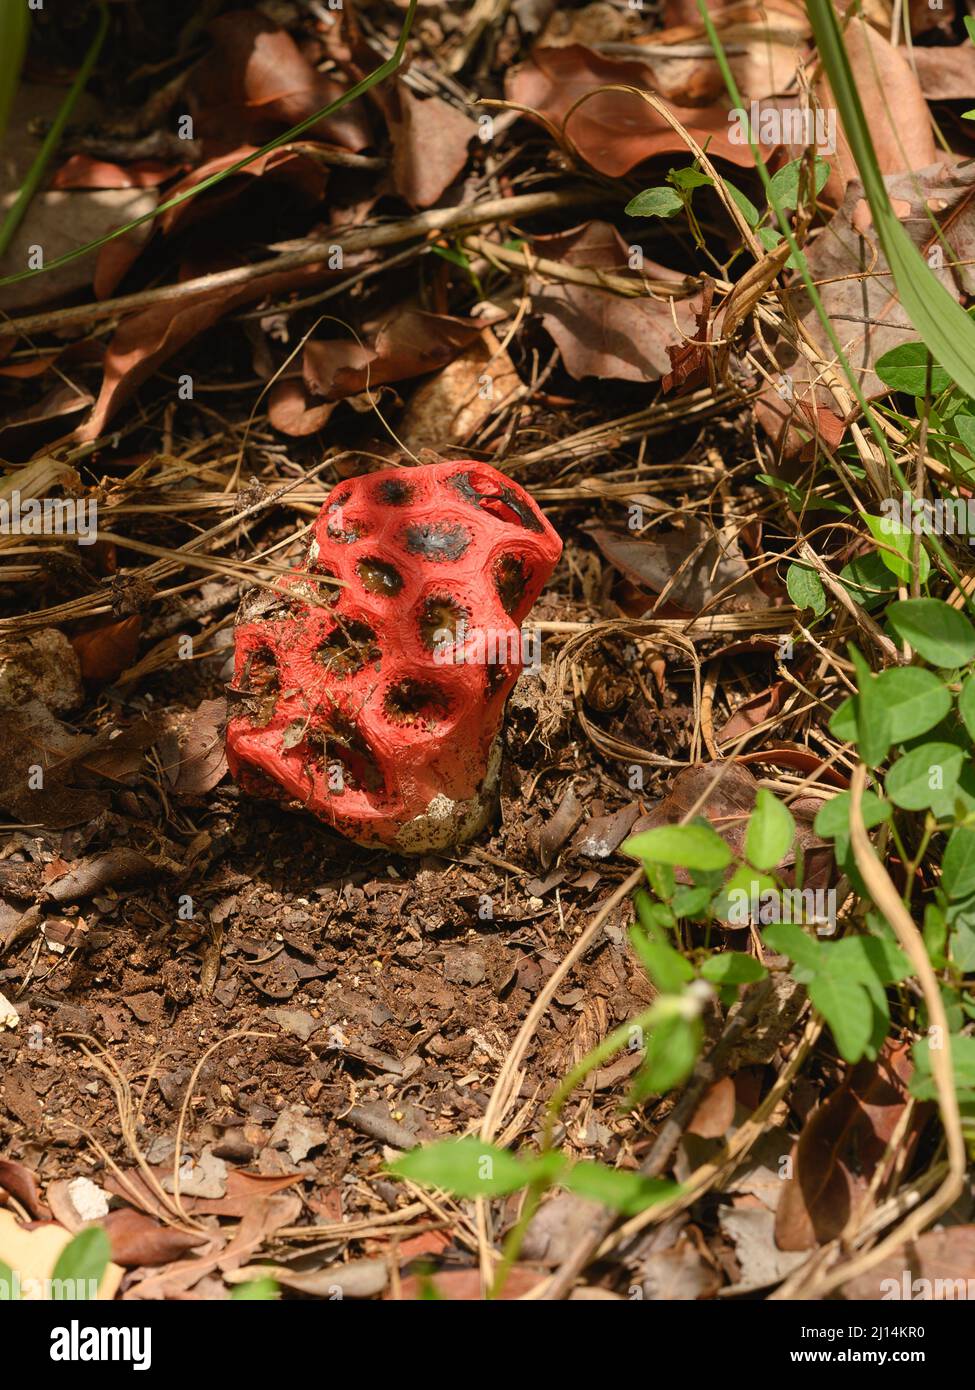 Photo shows a red poisonous mushroom. Clathrus ruber belongs to Basidiomycete fungi. Mushroom grows in jungle. In foreground there is a non-edible mus Stock Photo